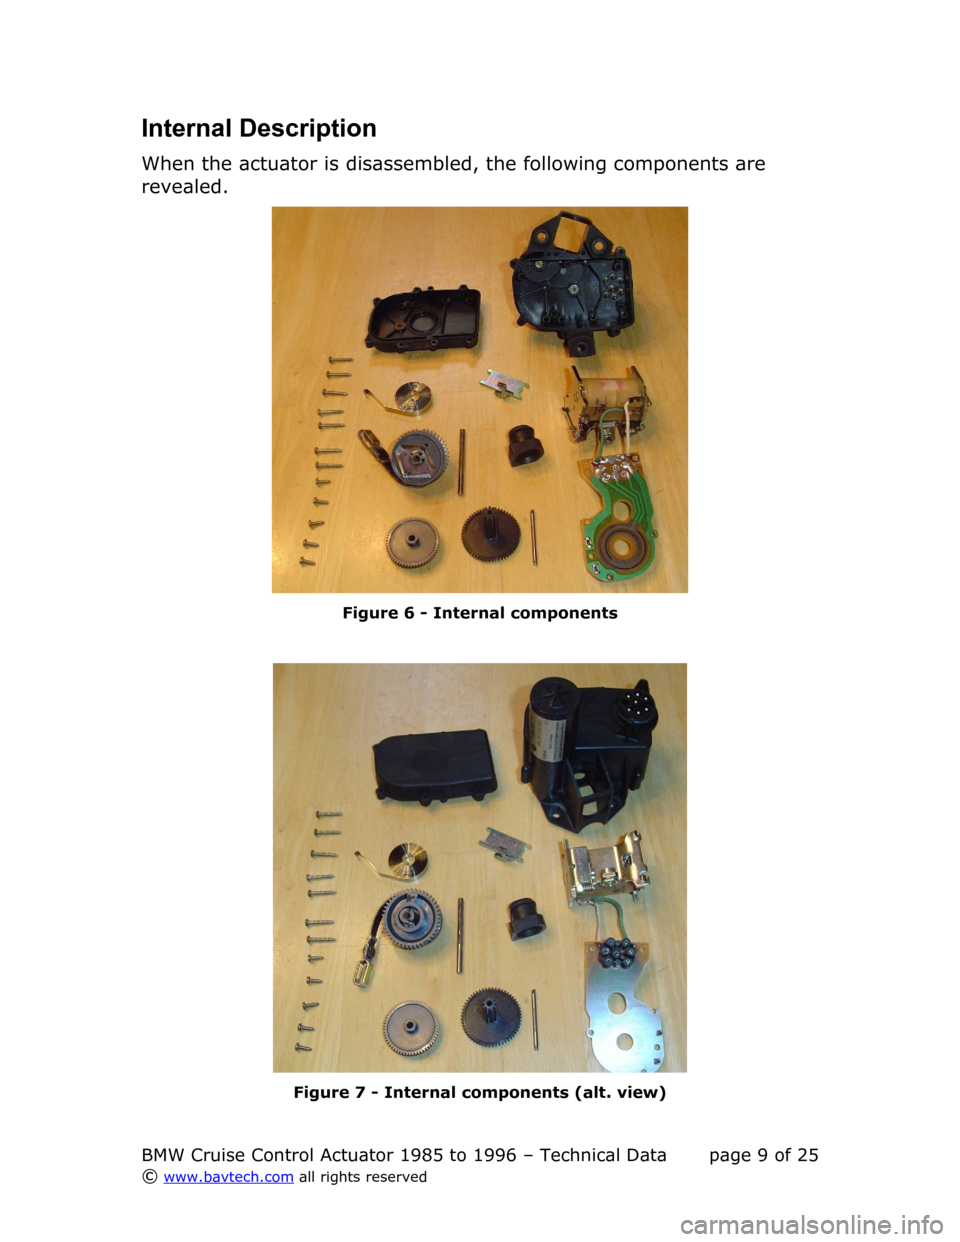 BMW 8 SERIES 1994 E31 Cruise Control Acutator Internal Description
When the actuator is disassembled, the following components are  
revealed.
Figure  6  - Internal components
Figure  7  - Internal components (alt. view)
BMW Cruise Control Actuat